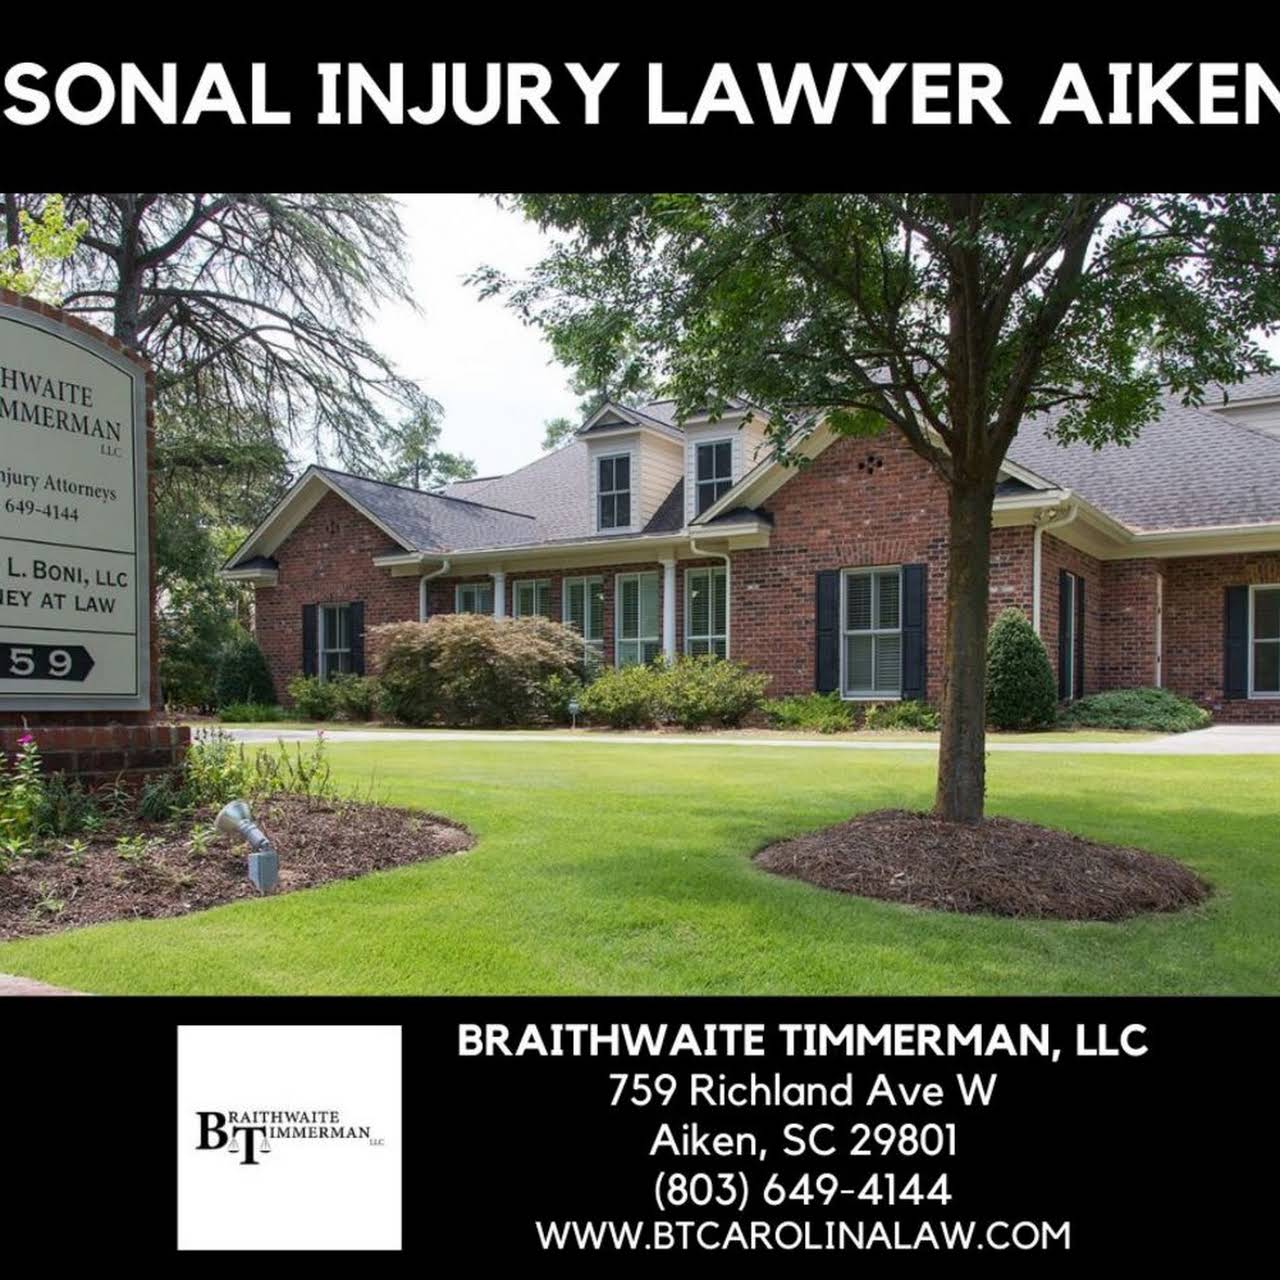 Personal Injury Lawyers In Charleston SC Accident Attorneys - John Price